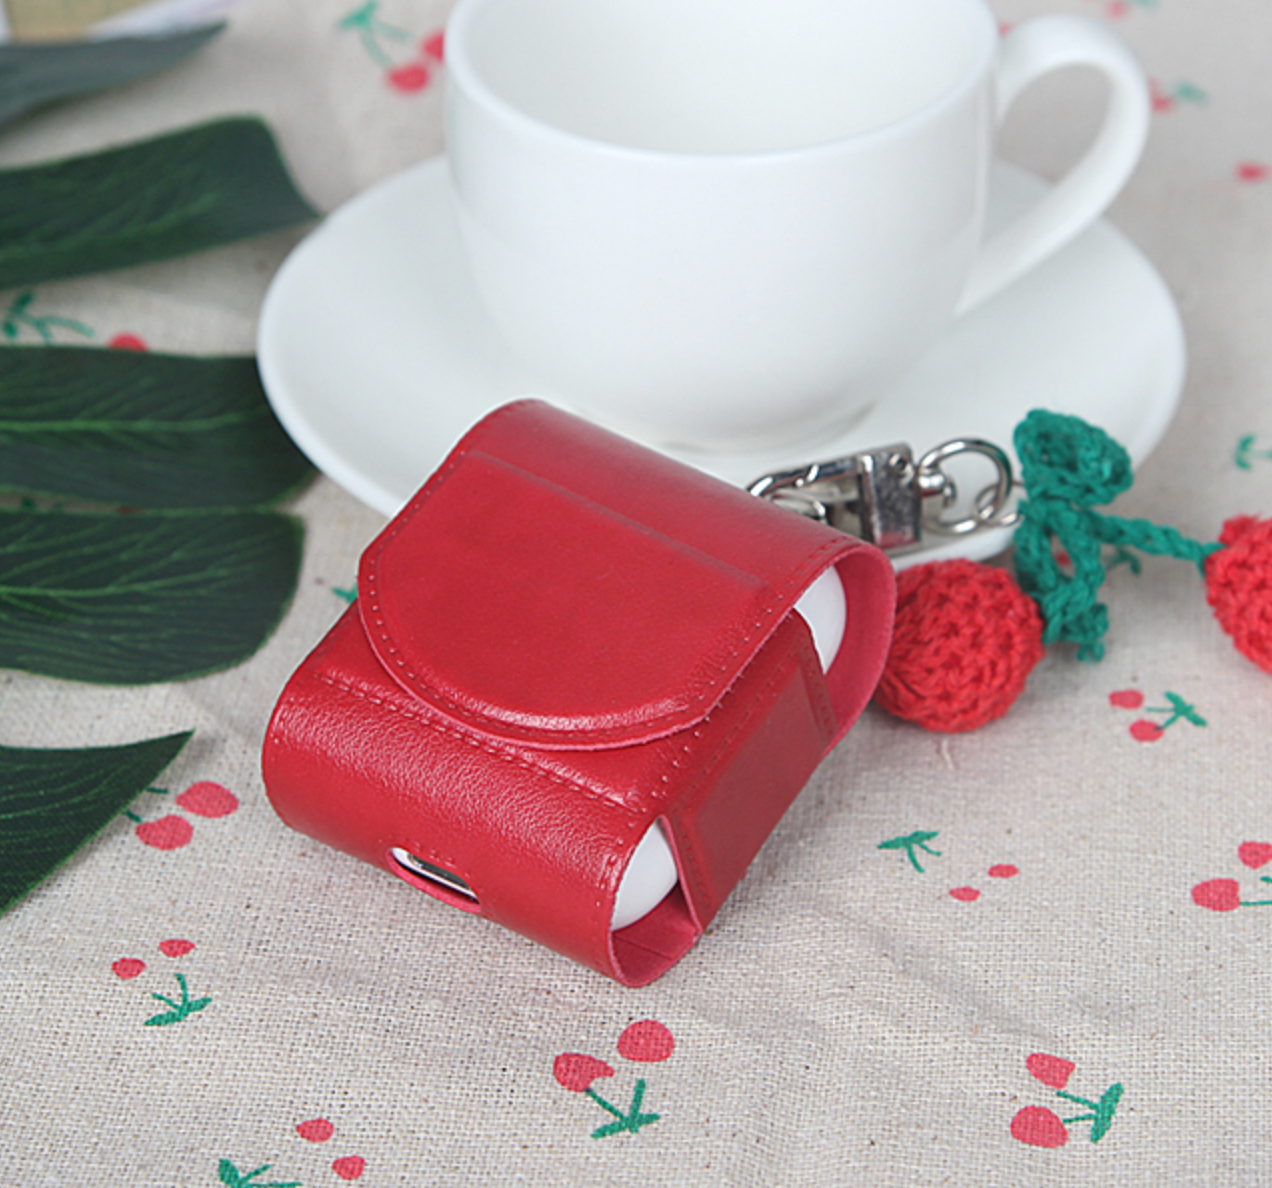 RED CHERRY AIRPODS CASE